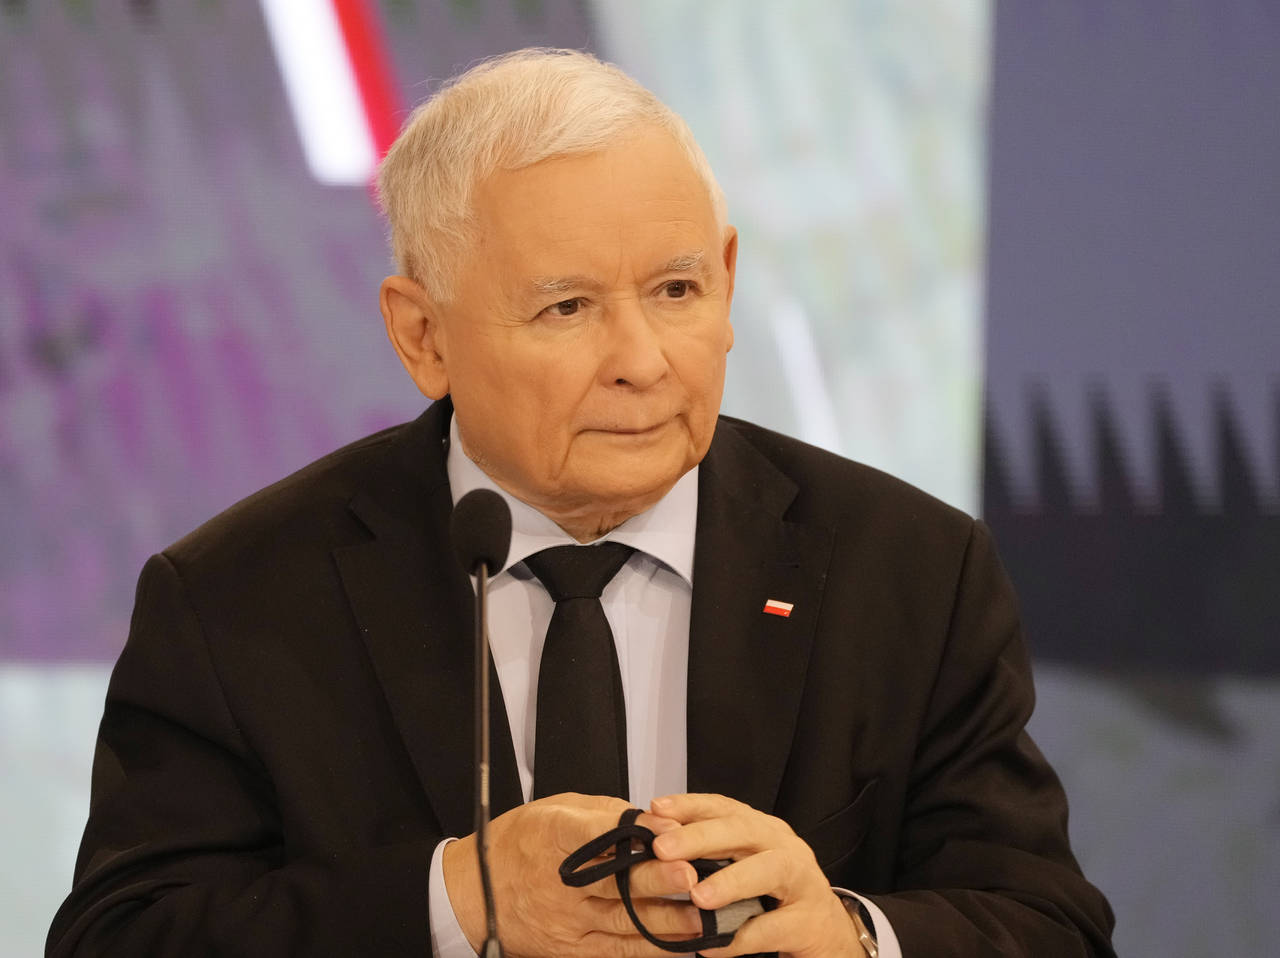 Jaroslaw Kaczynski, the head of Poland's ruling party Law and Justice, speaks at a news conference ...